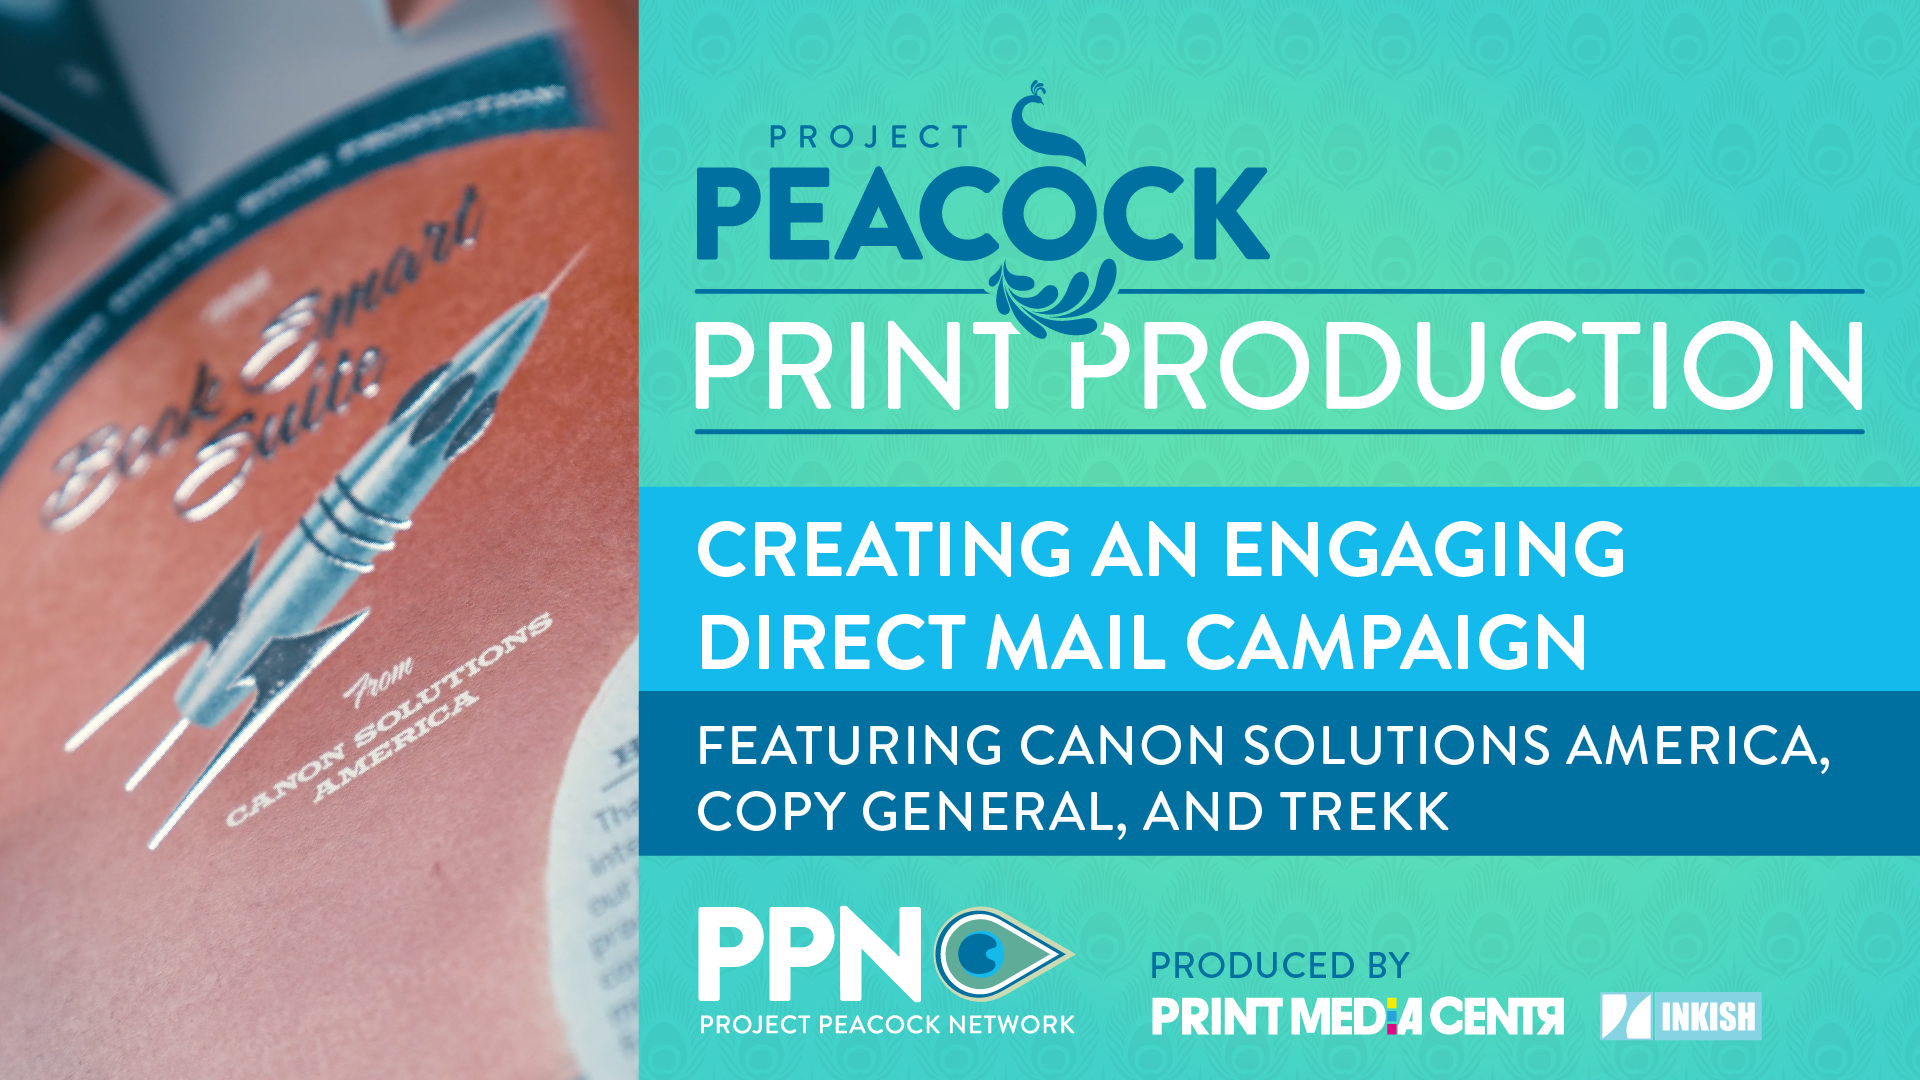 Video Thumbnail for Project Peacock Print Production video title Creating and Engaging Direct Mail Campaign to the right. A photo of the direct mail is on the left of the thumbnail